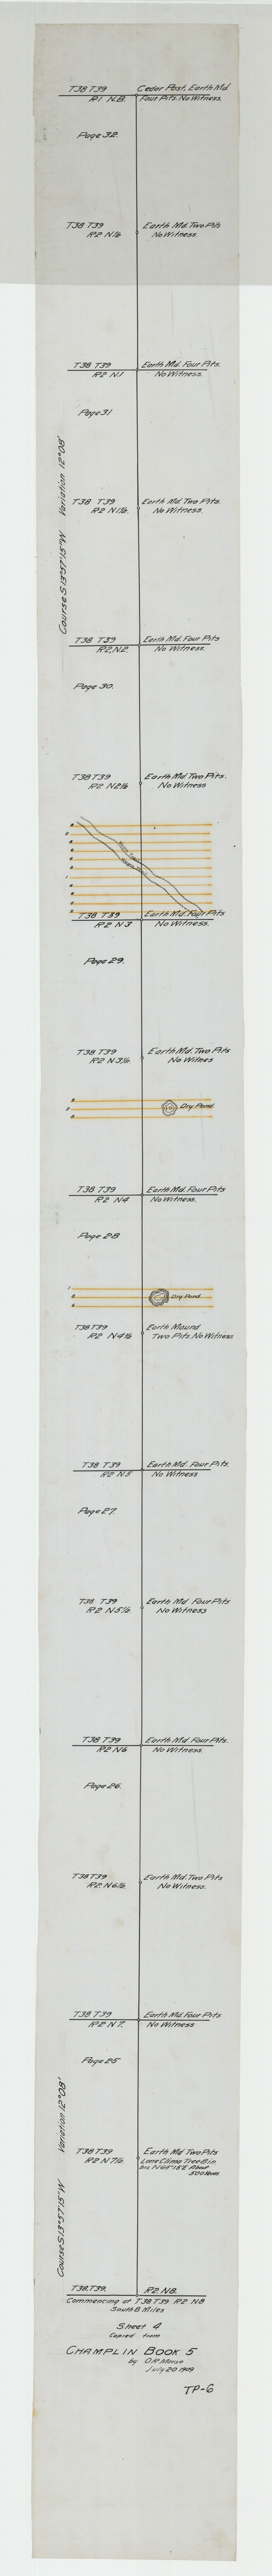 93181, Sheet 4 copied from Champlin Book 5 [Strip Map showing T. & P. connecting lines], Twichell Survey Records